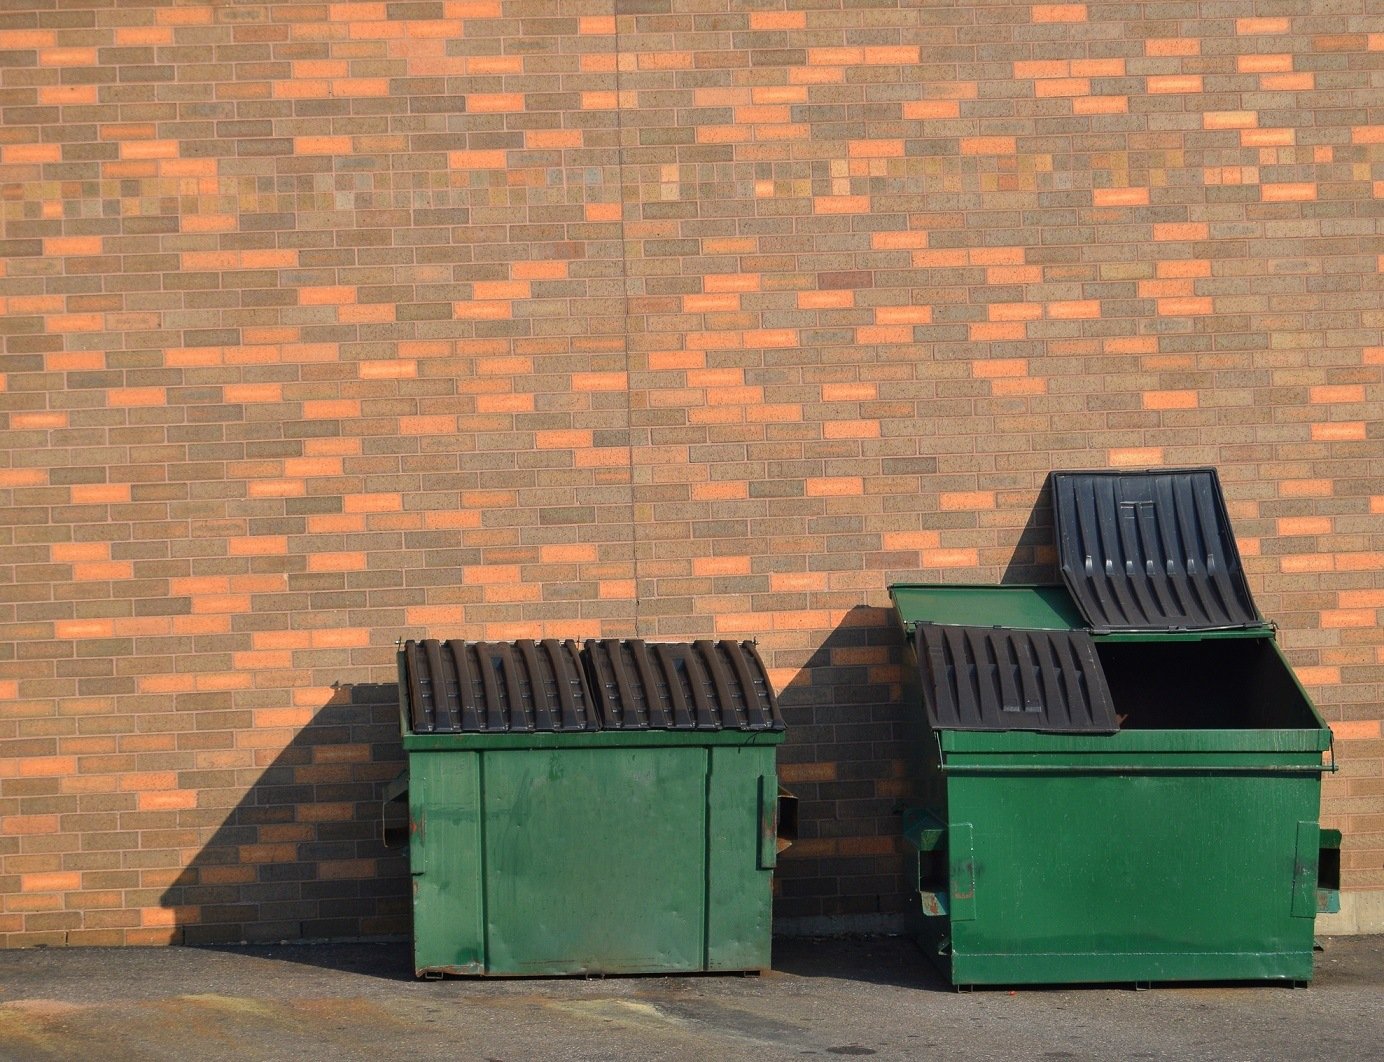 Green recycling dumpsters against a brick wall